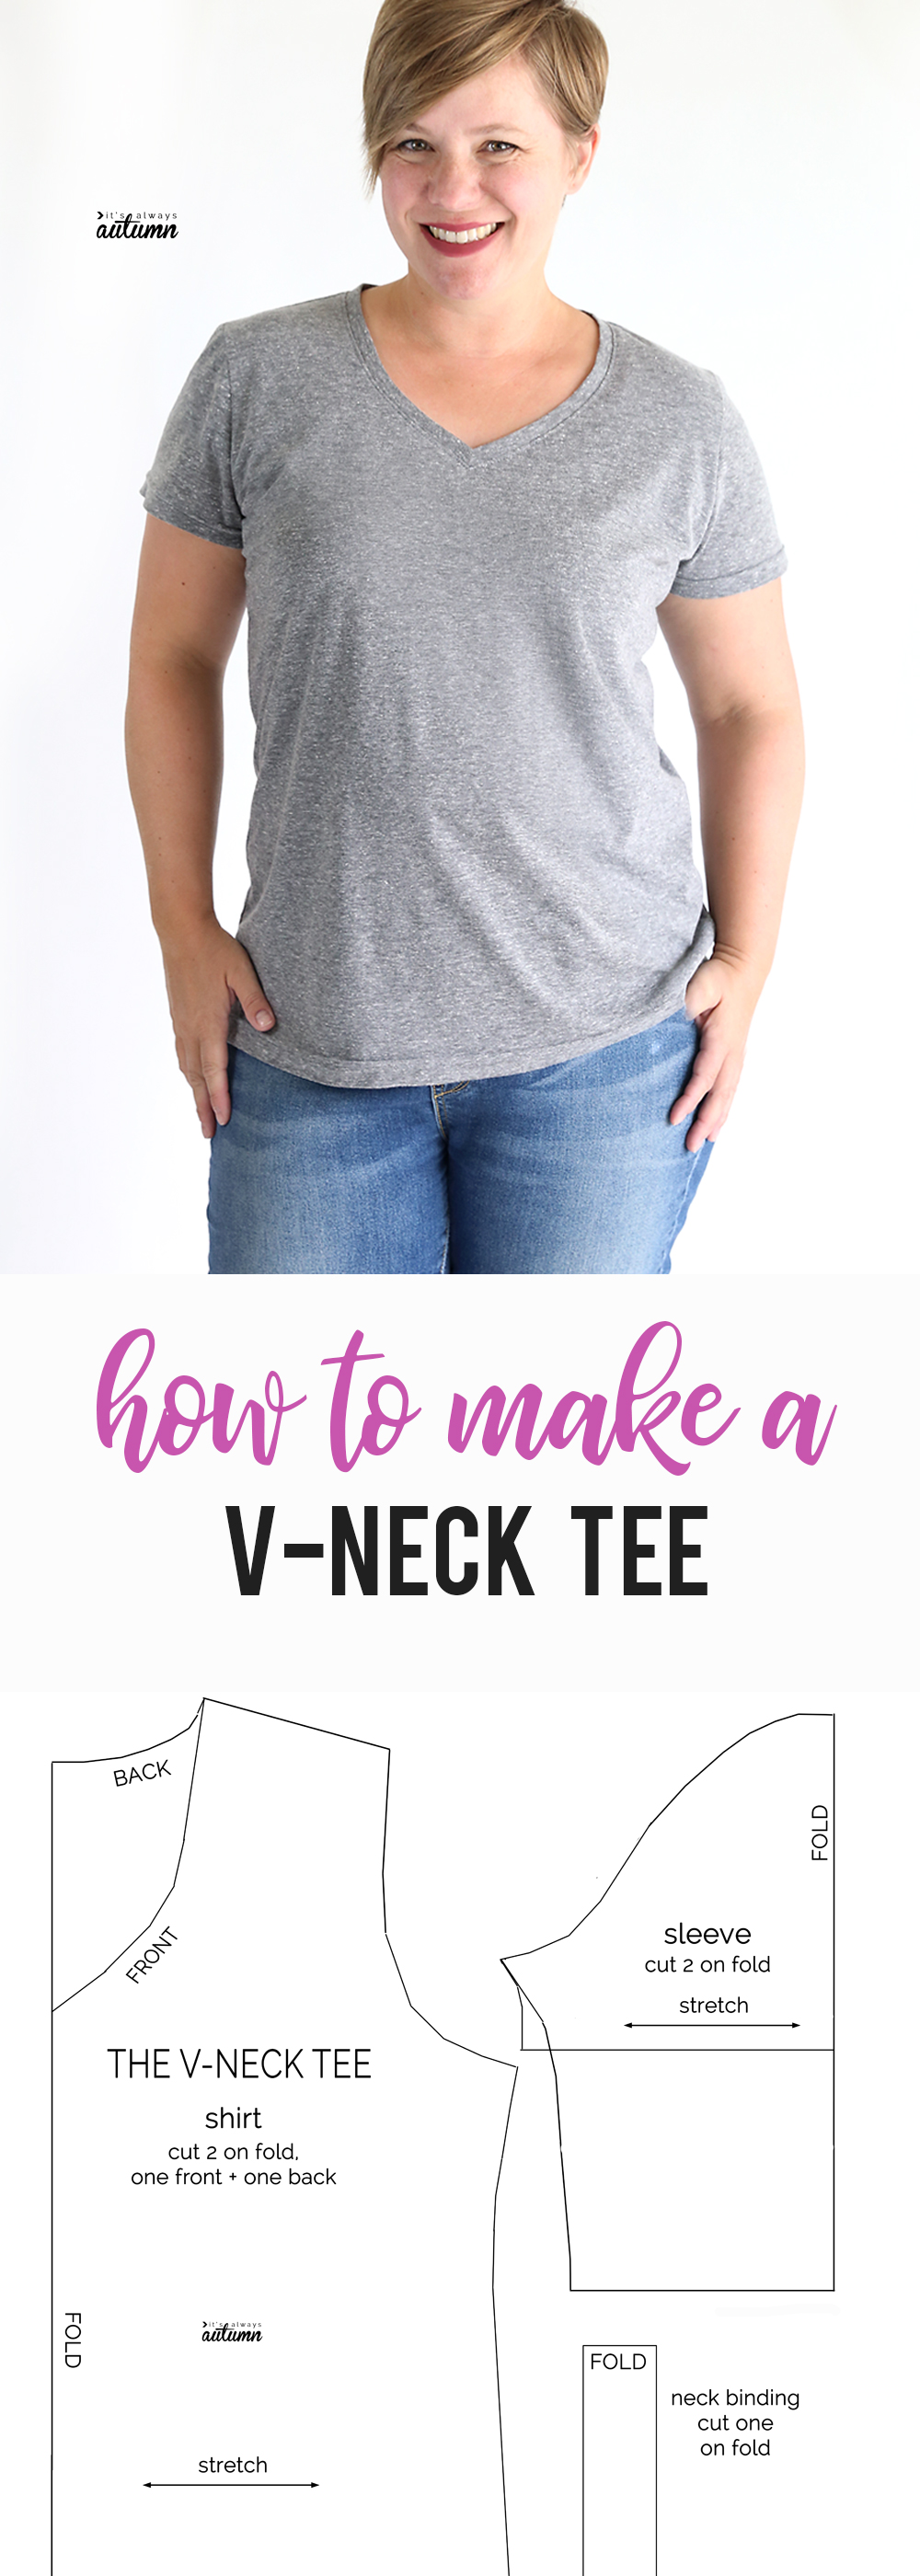 Learn how to make a v-neck t-shirt with this easy to follow sewing tutorial! Free pattern in size L included.